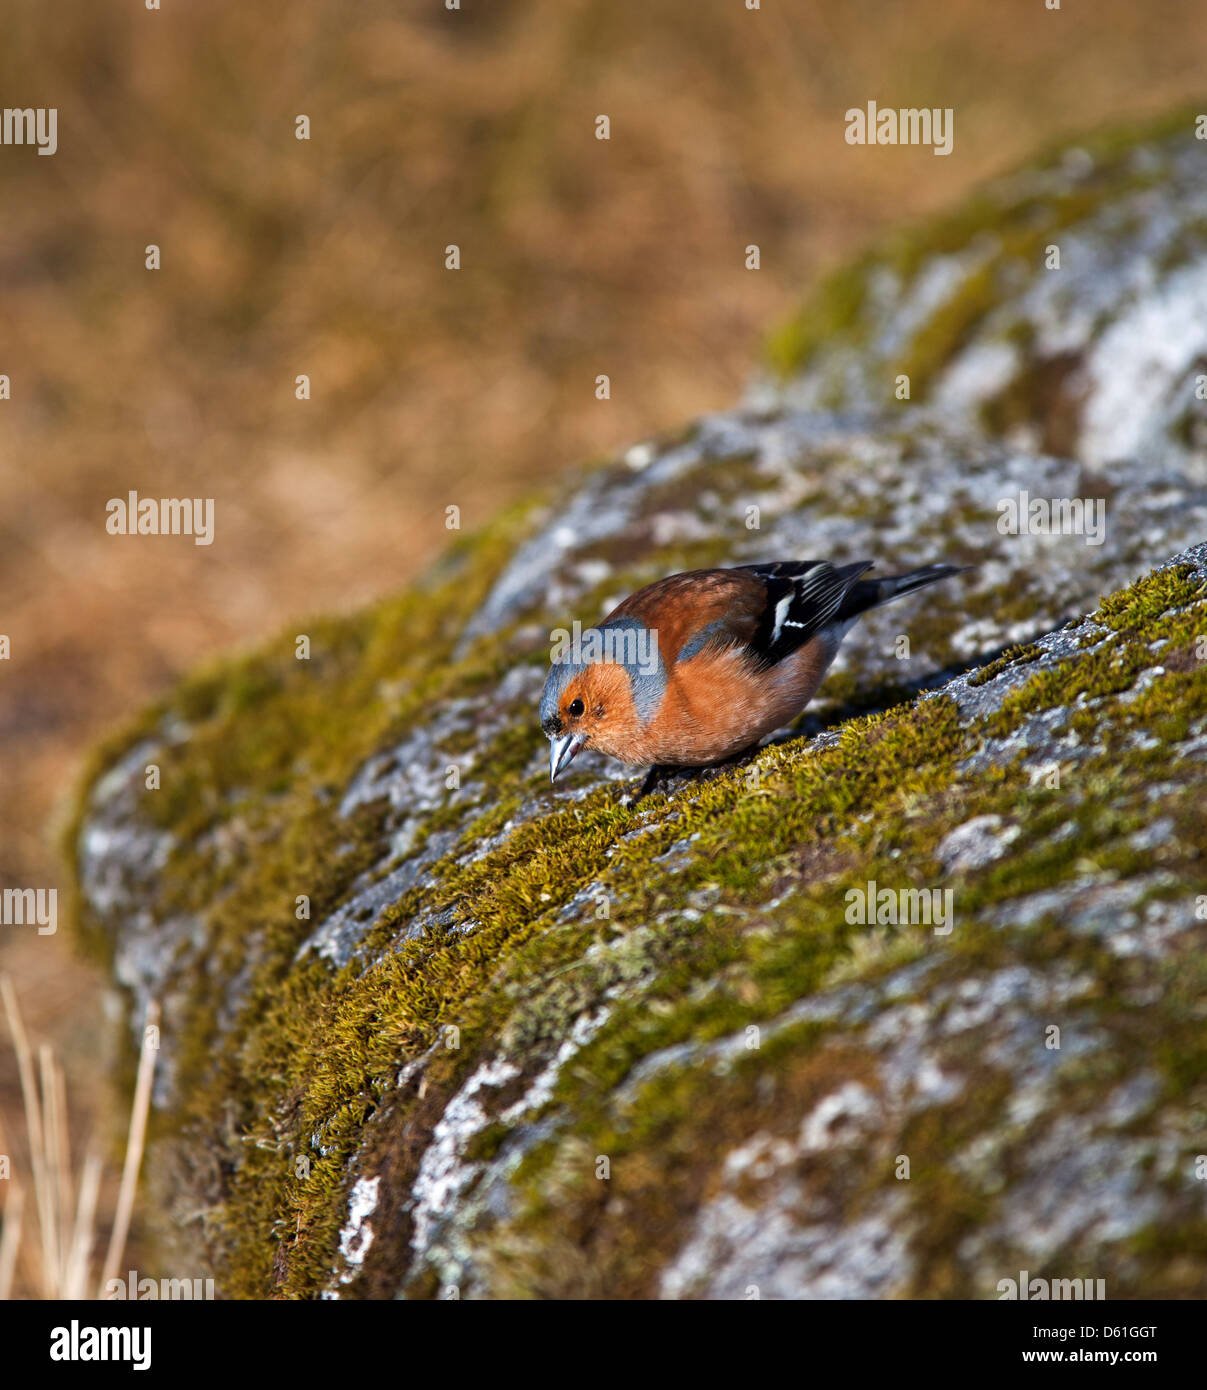 Chaffinch Male perched on rock covered in moss Stock Photo